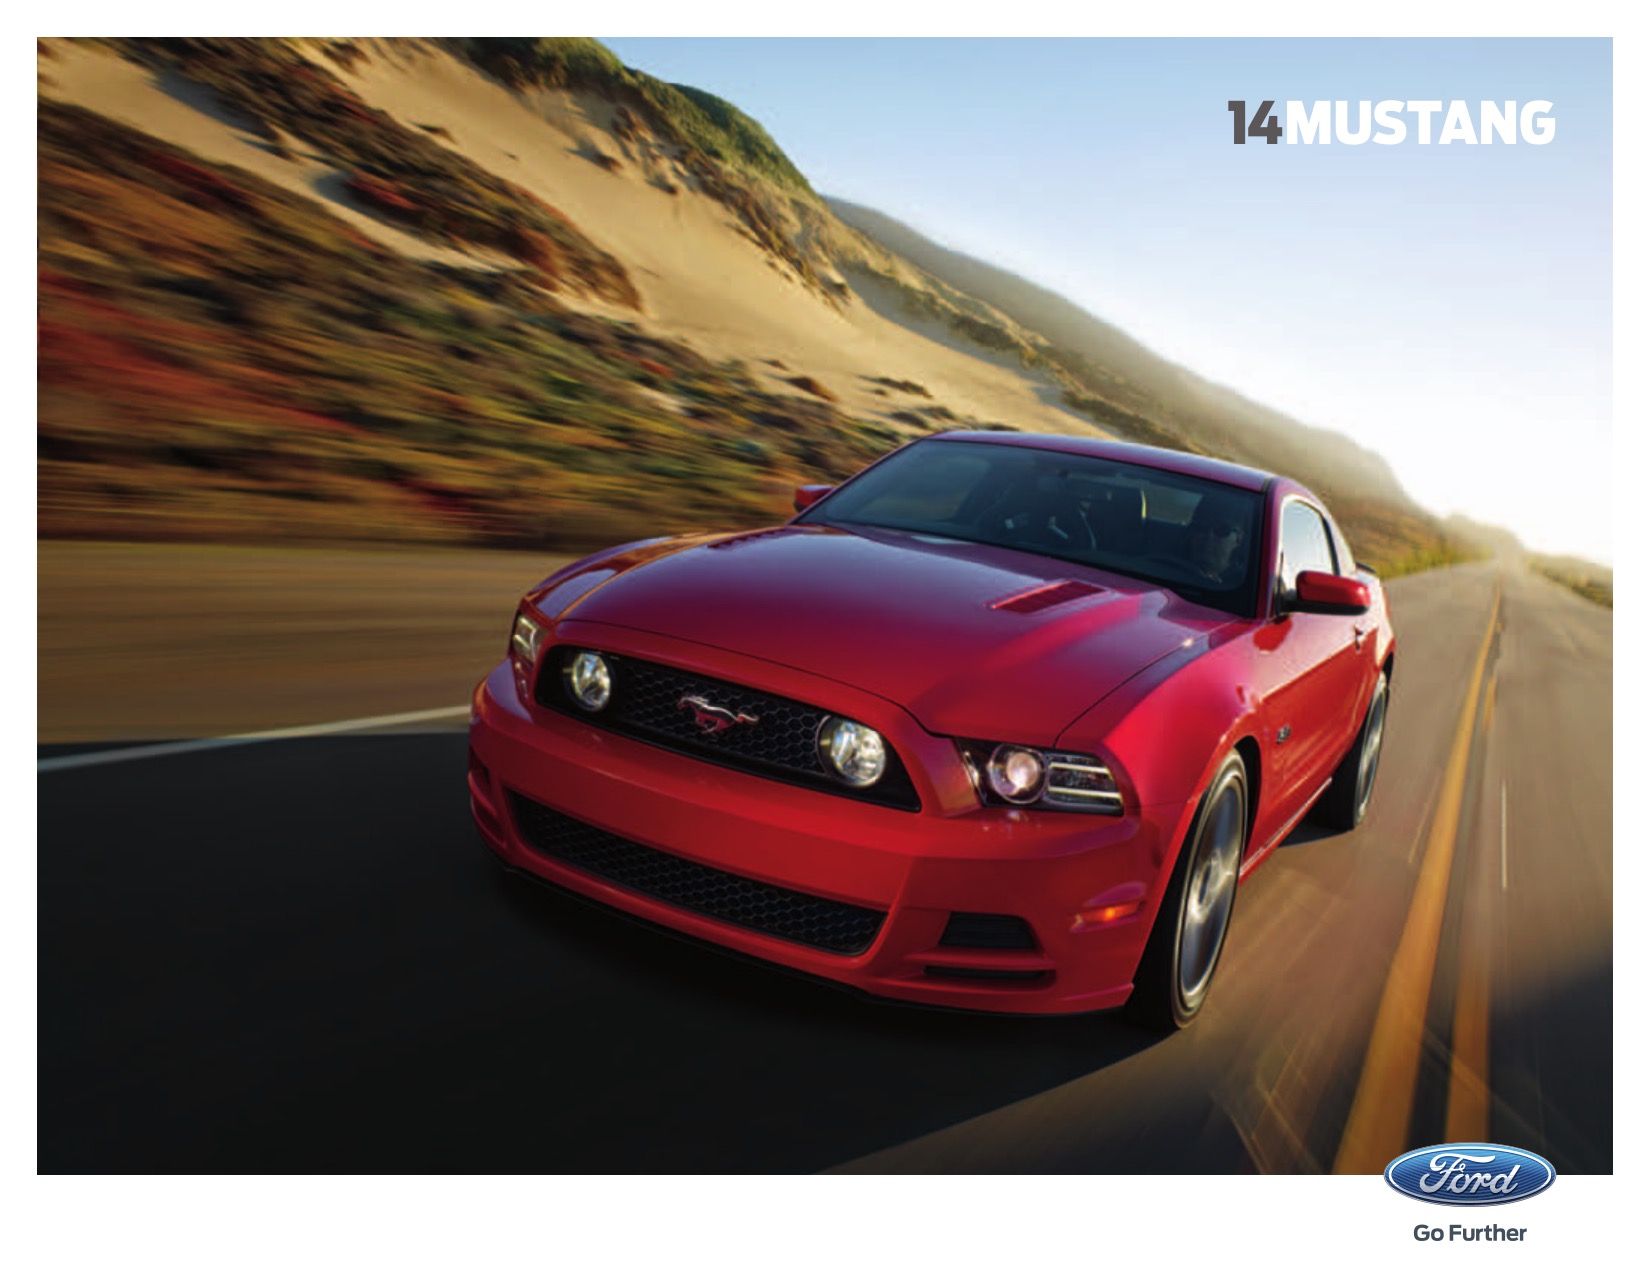 2014 Ford Mustang Brochure